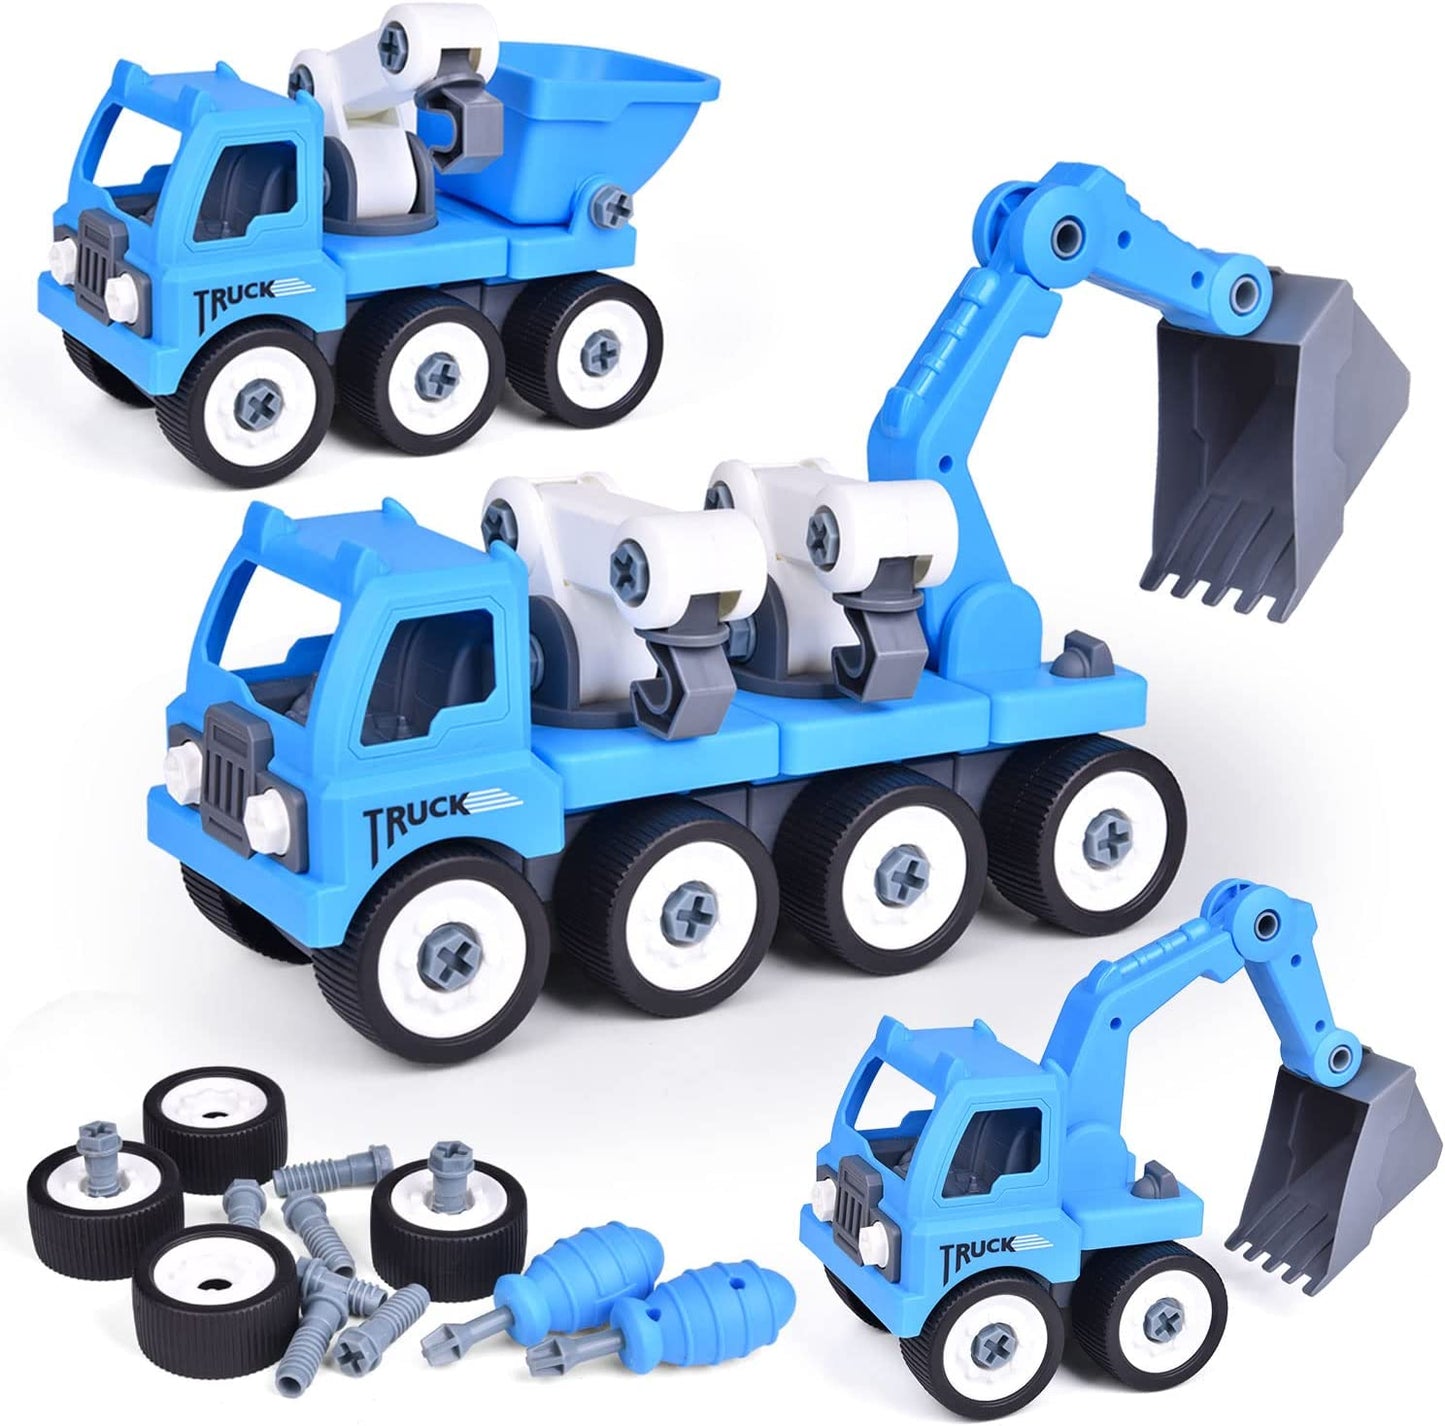 Fun Little Toys Take Apart Toy Construction Truck - STEM Toy Building Toy for Boys and Girls